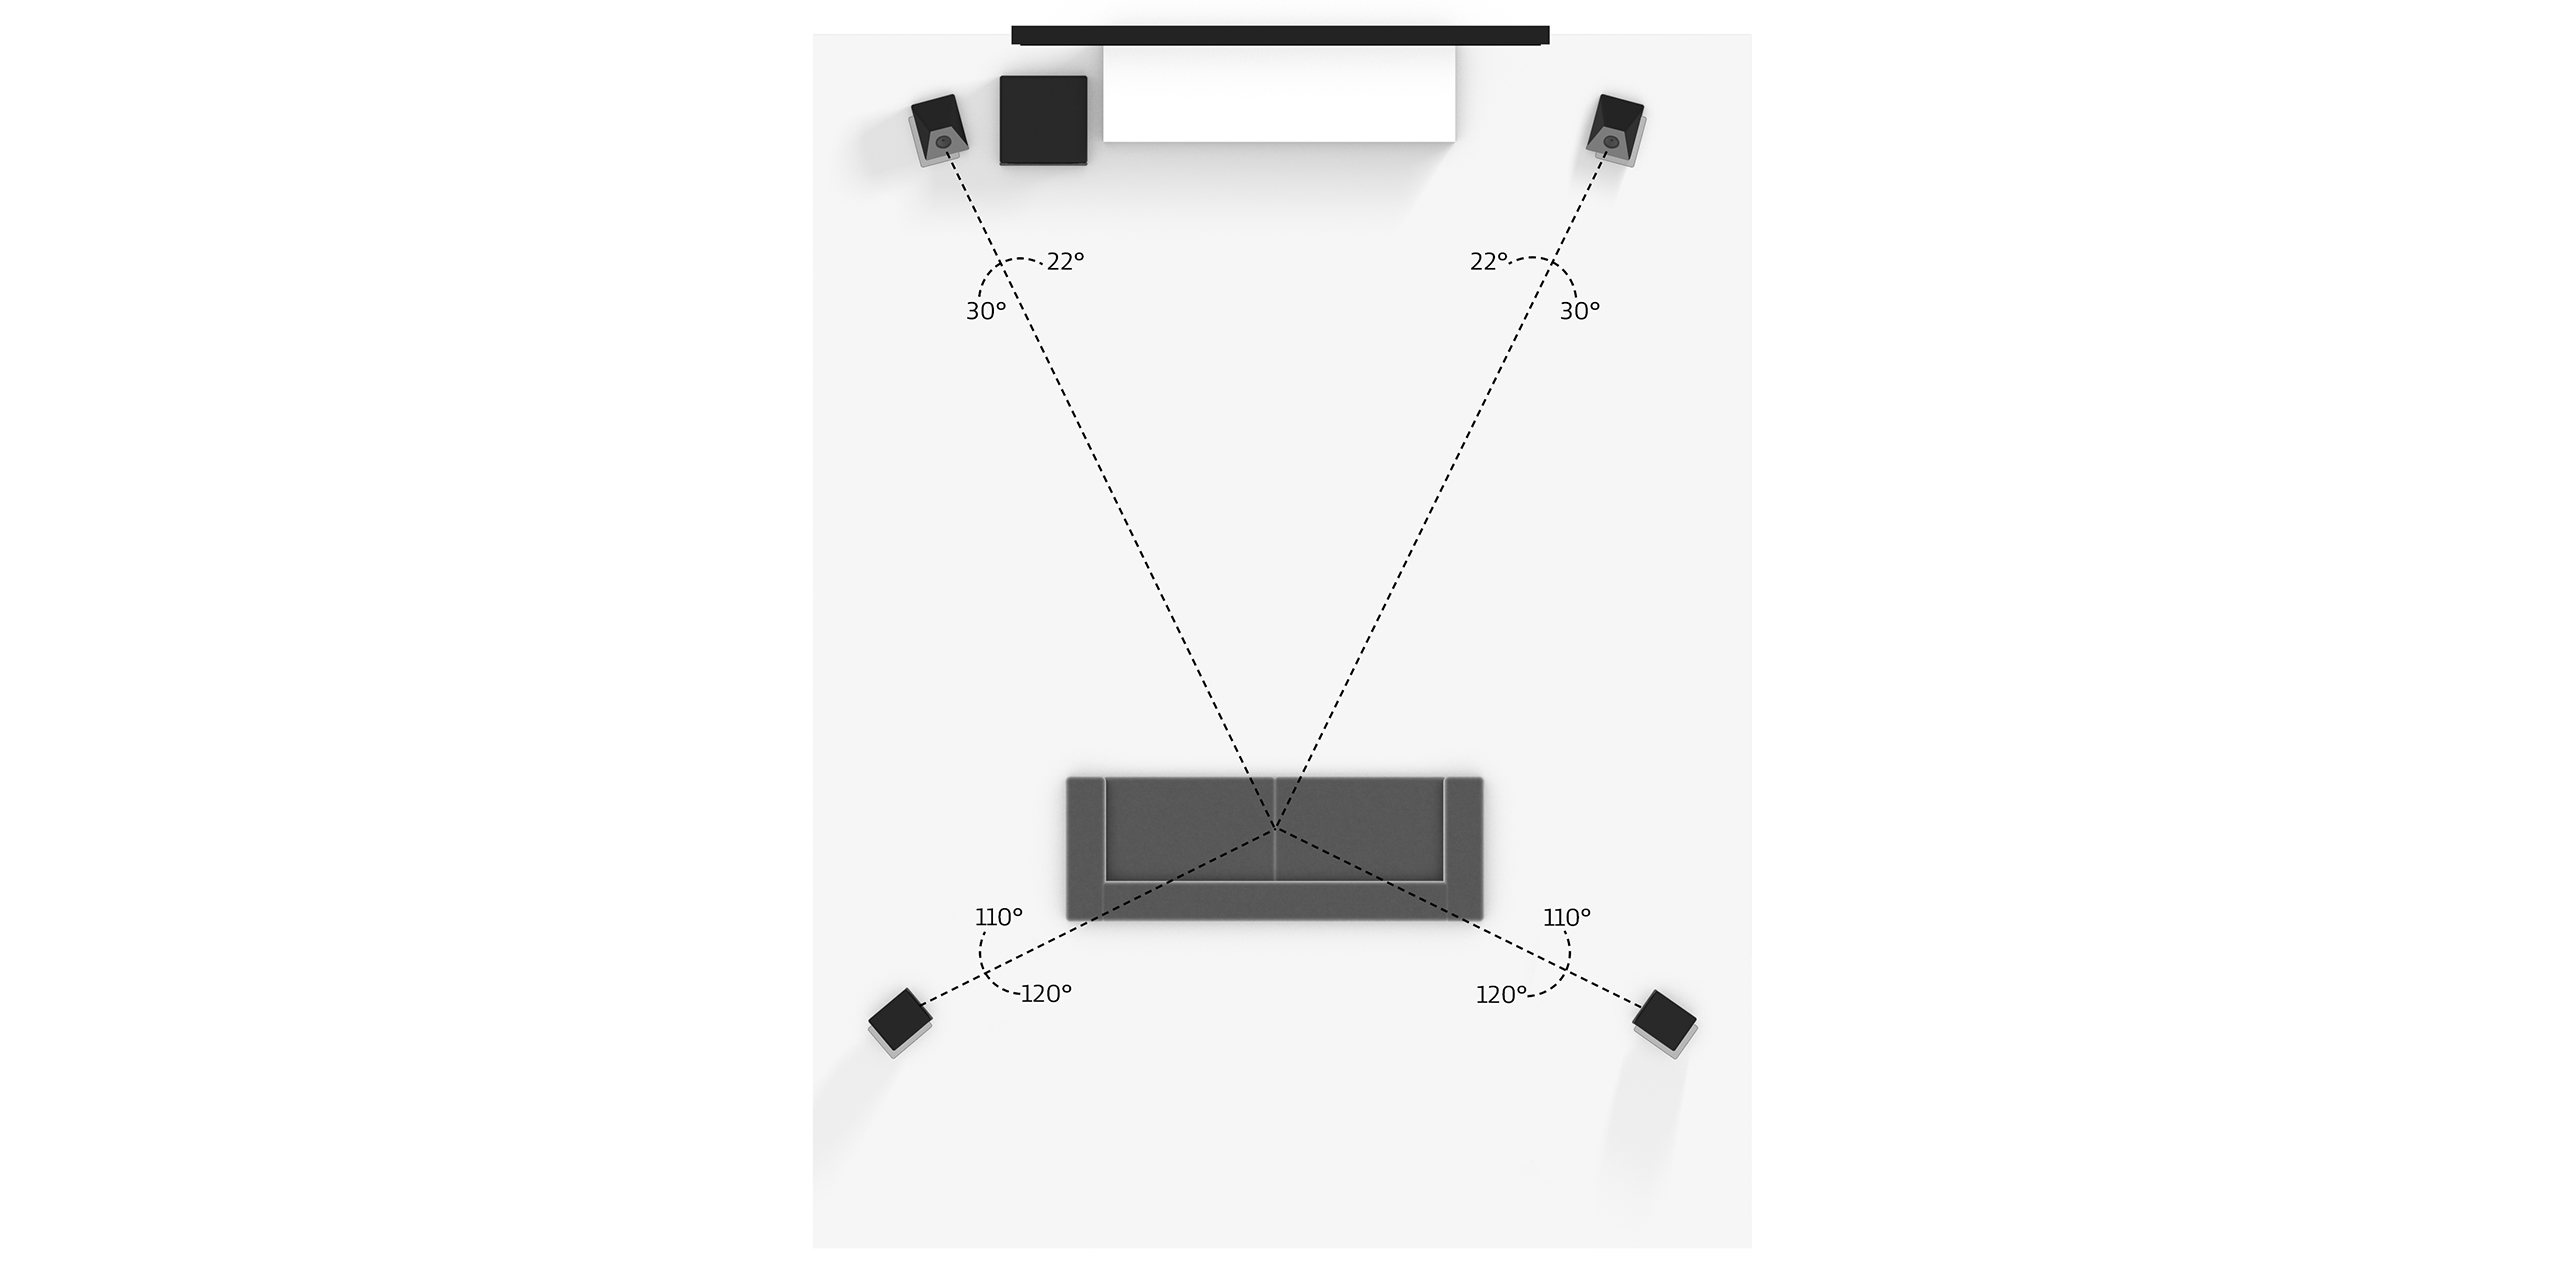 dolby atmos speaker placement 7.1.4 speaker placement